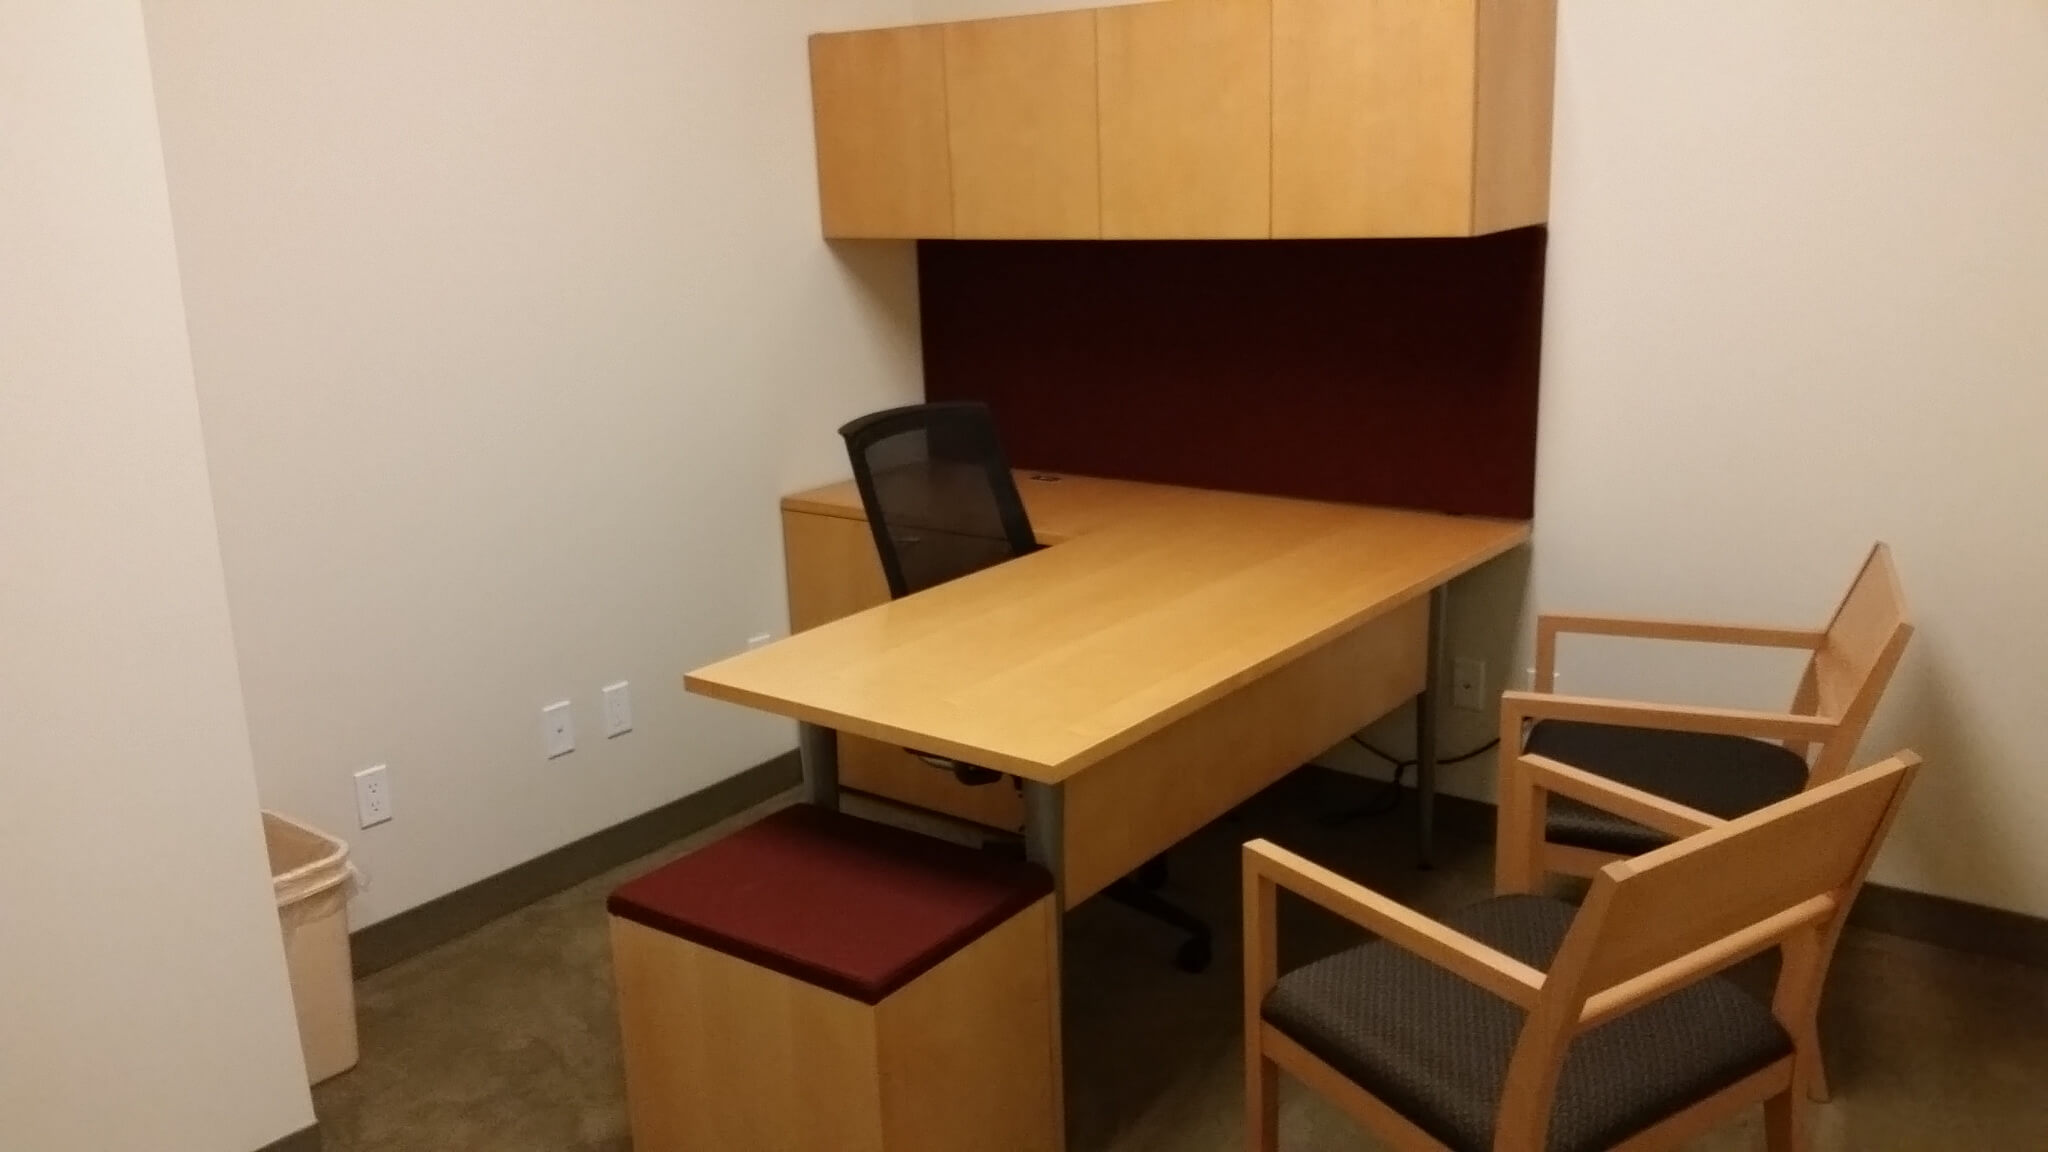 Used Office Chairs For Sale - Teknion Wood Guest Chairs - Used Office Furniture